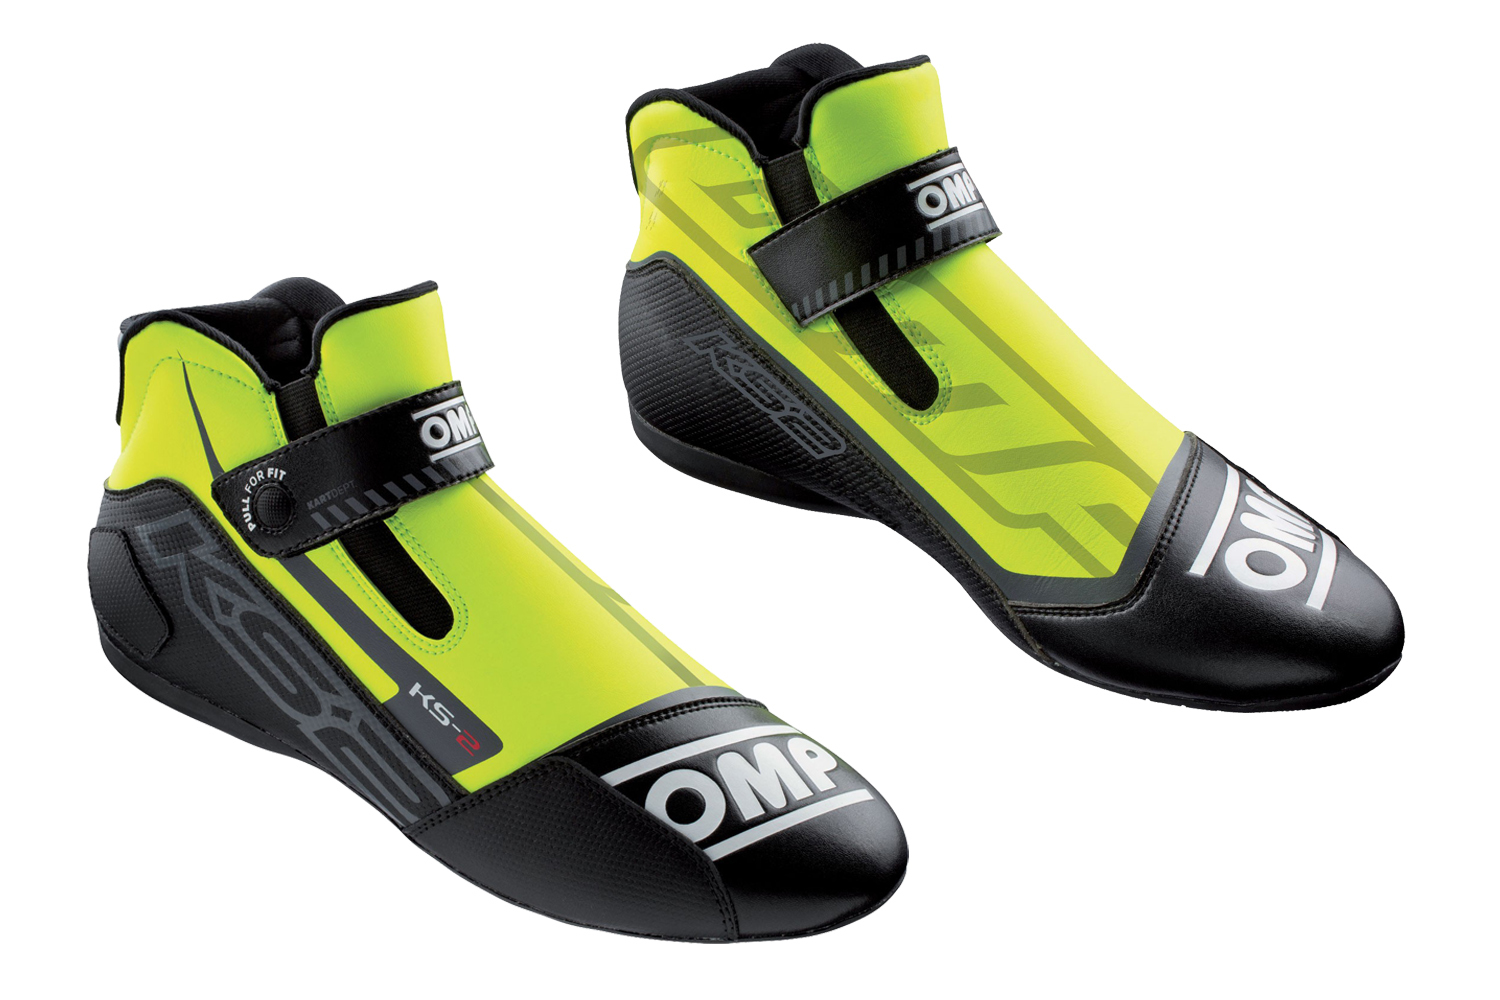 OMP Racing IC82505946 - Shoe, KS-2, Driving, Mid-Top, FIA Approved, Suede Leather Outer, Fire Retardant Fabric Inner, Fluorescent Yellow / Black, Euro Size 46, Pair